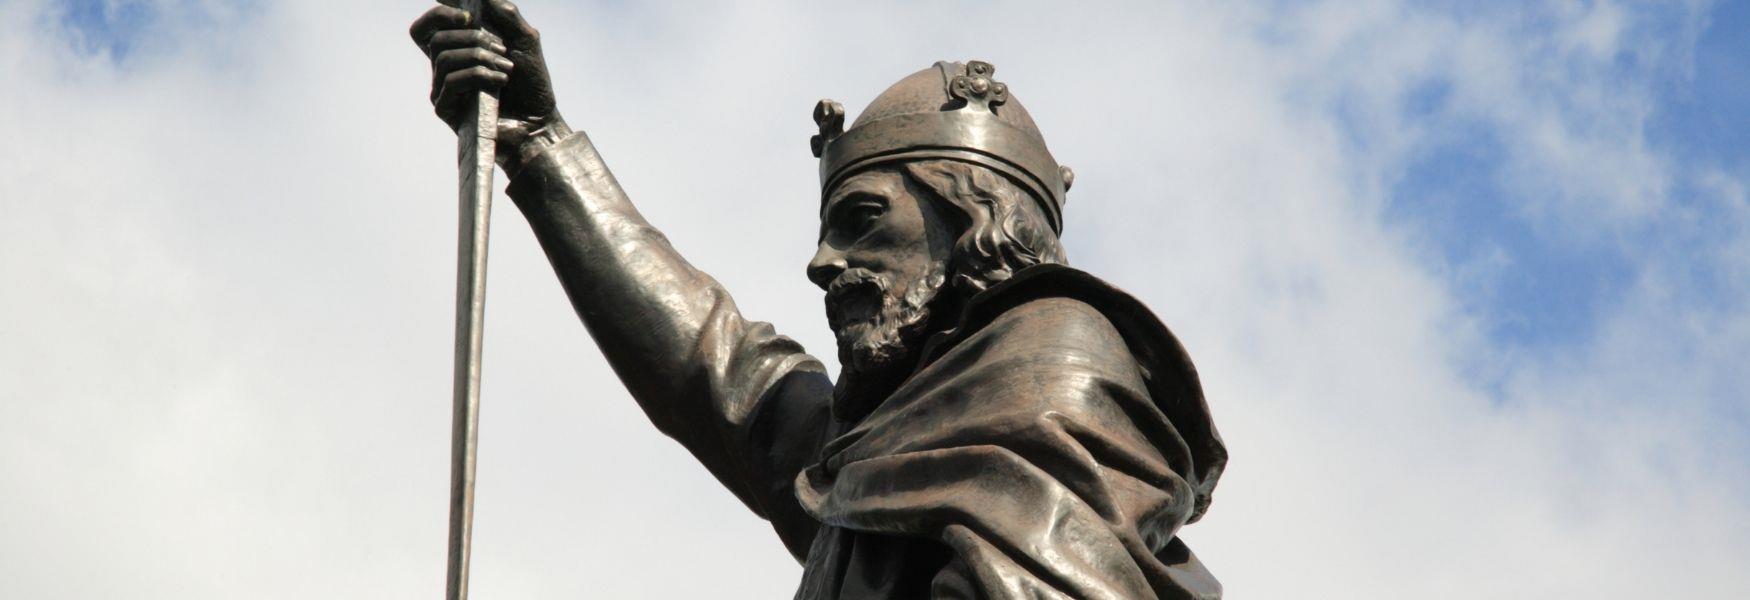 image shows statue of alfred the great